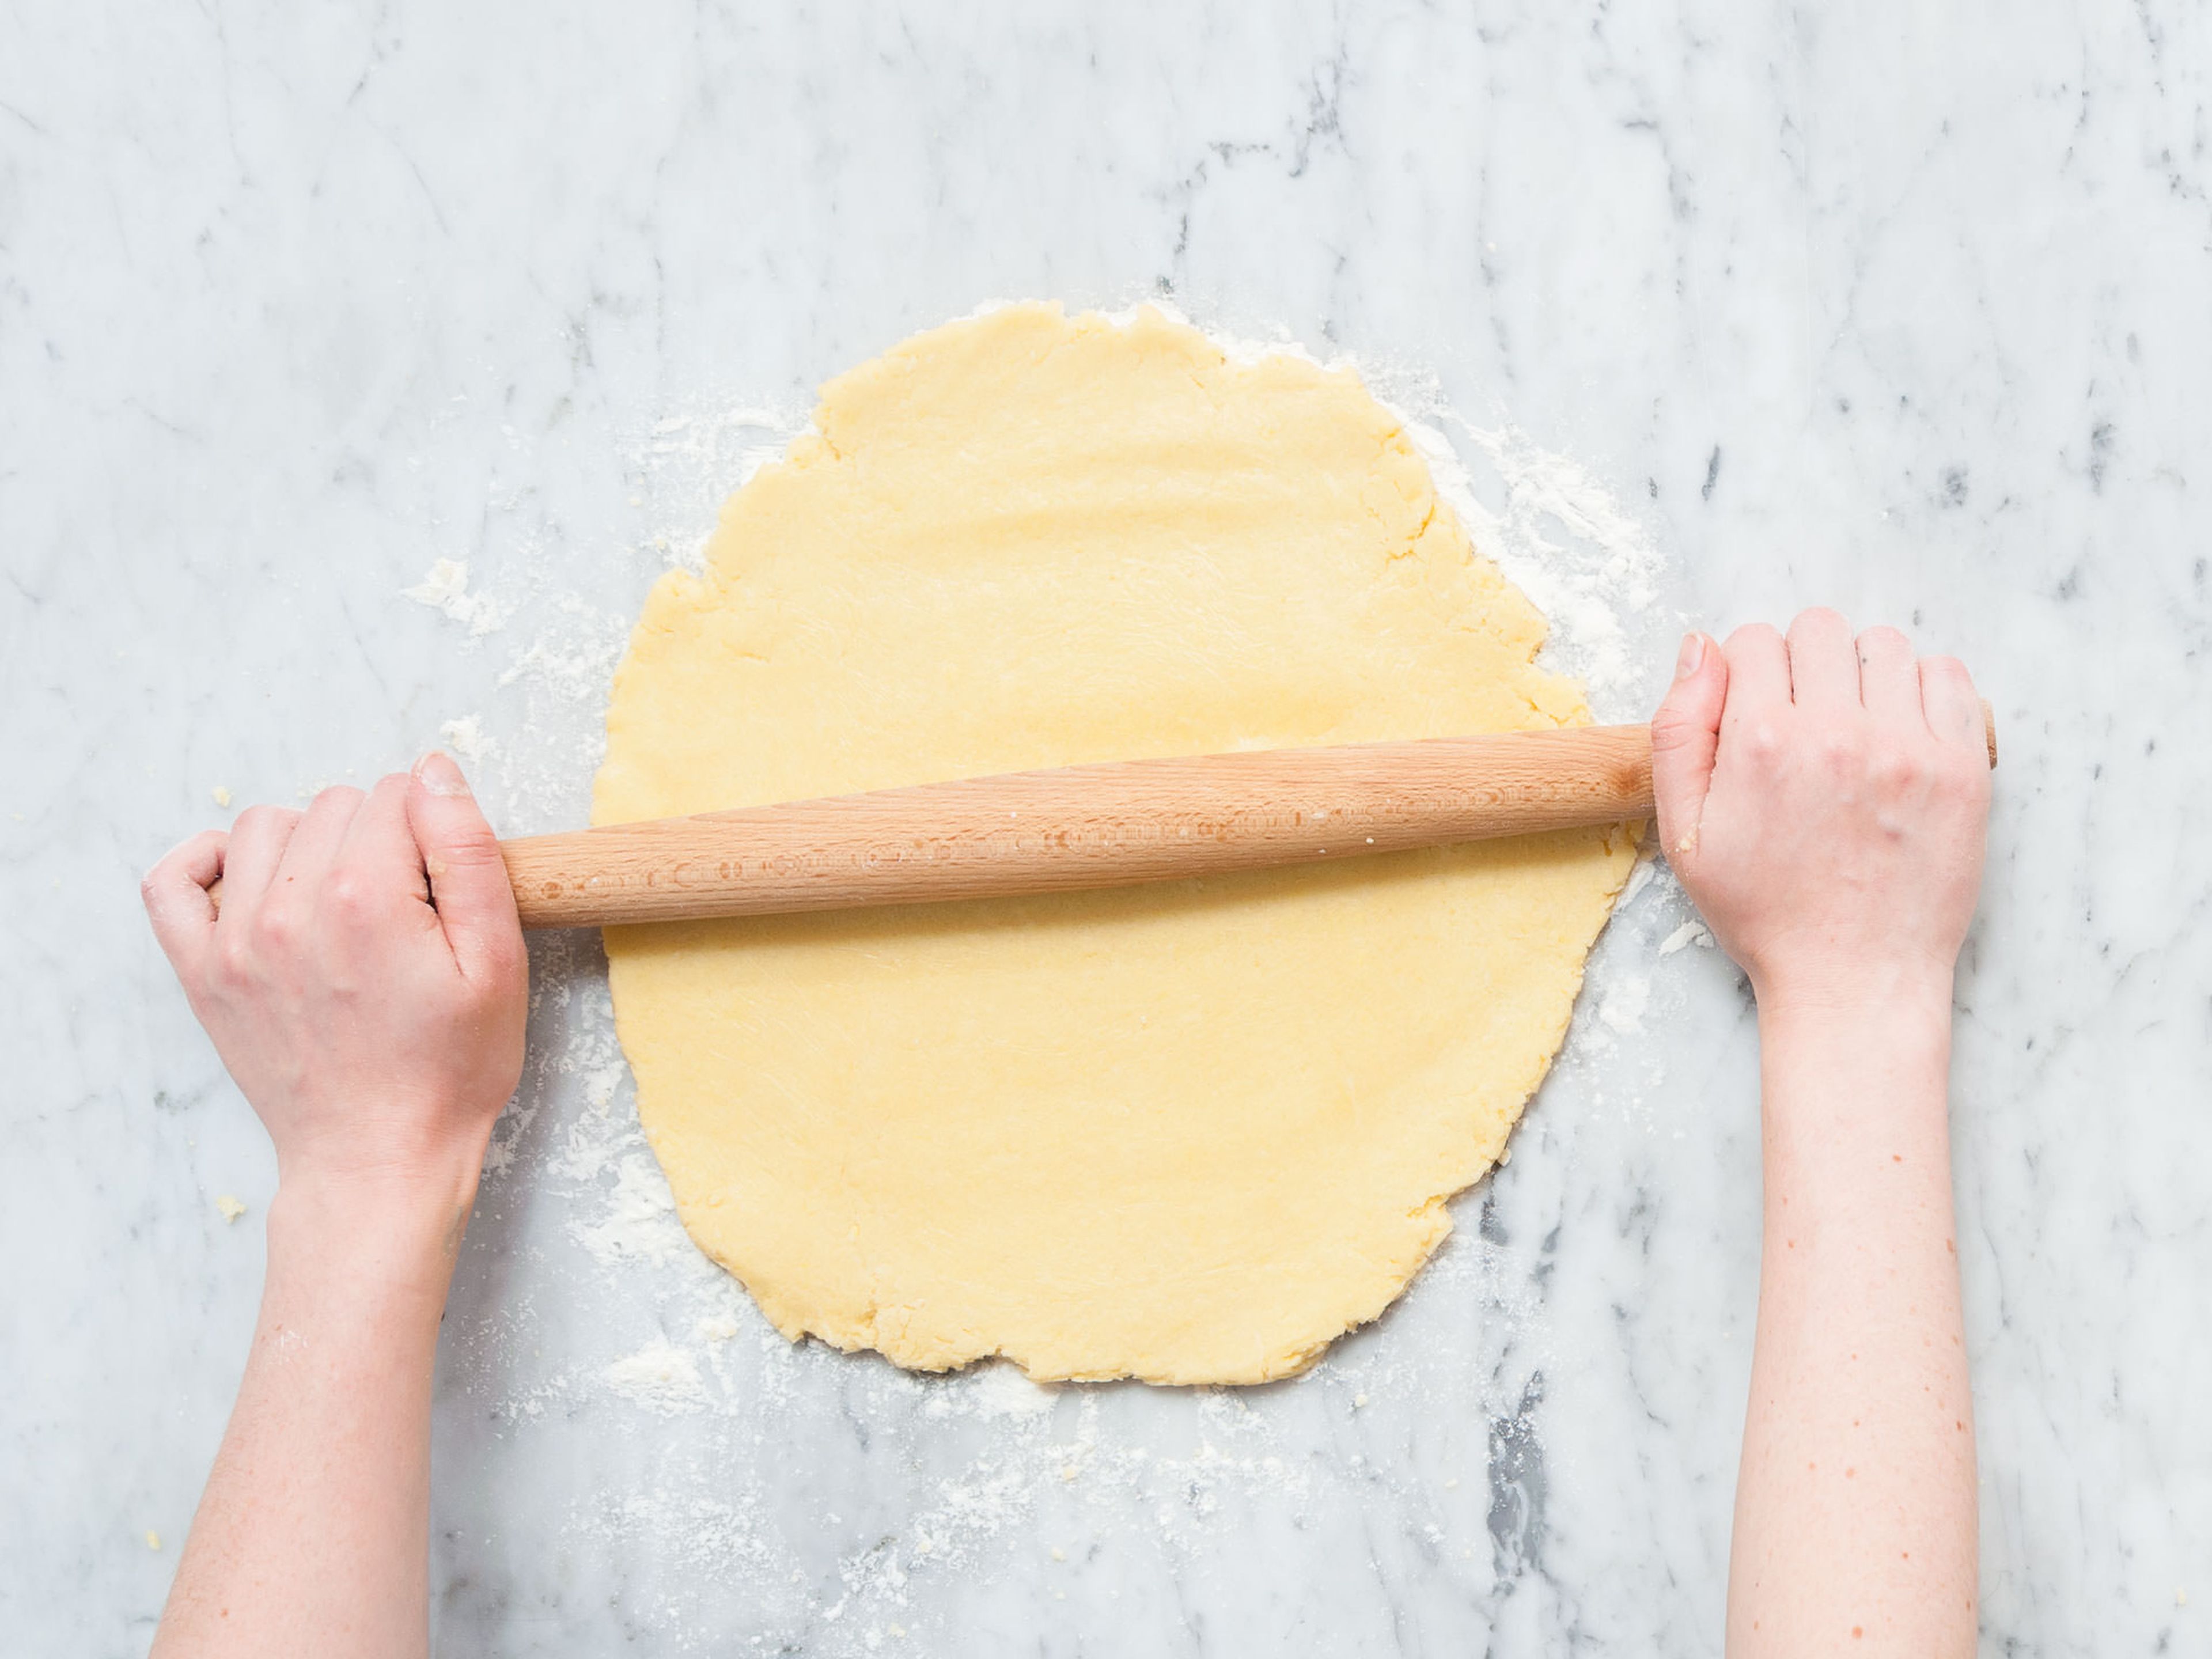 Add flour, sugar, baking powder, salt, butter, and eggs to a large mixing bowl and mix with a hand mixer until combined. Transfer dough onto a floured work surface and roll out until it’s approx. 1-cm/0.5-inch thick. Cut into rectangles using a knife or pastry wheel,